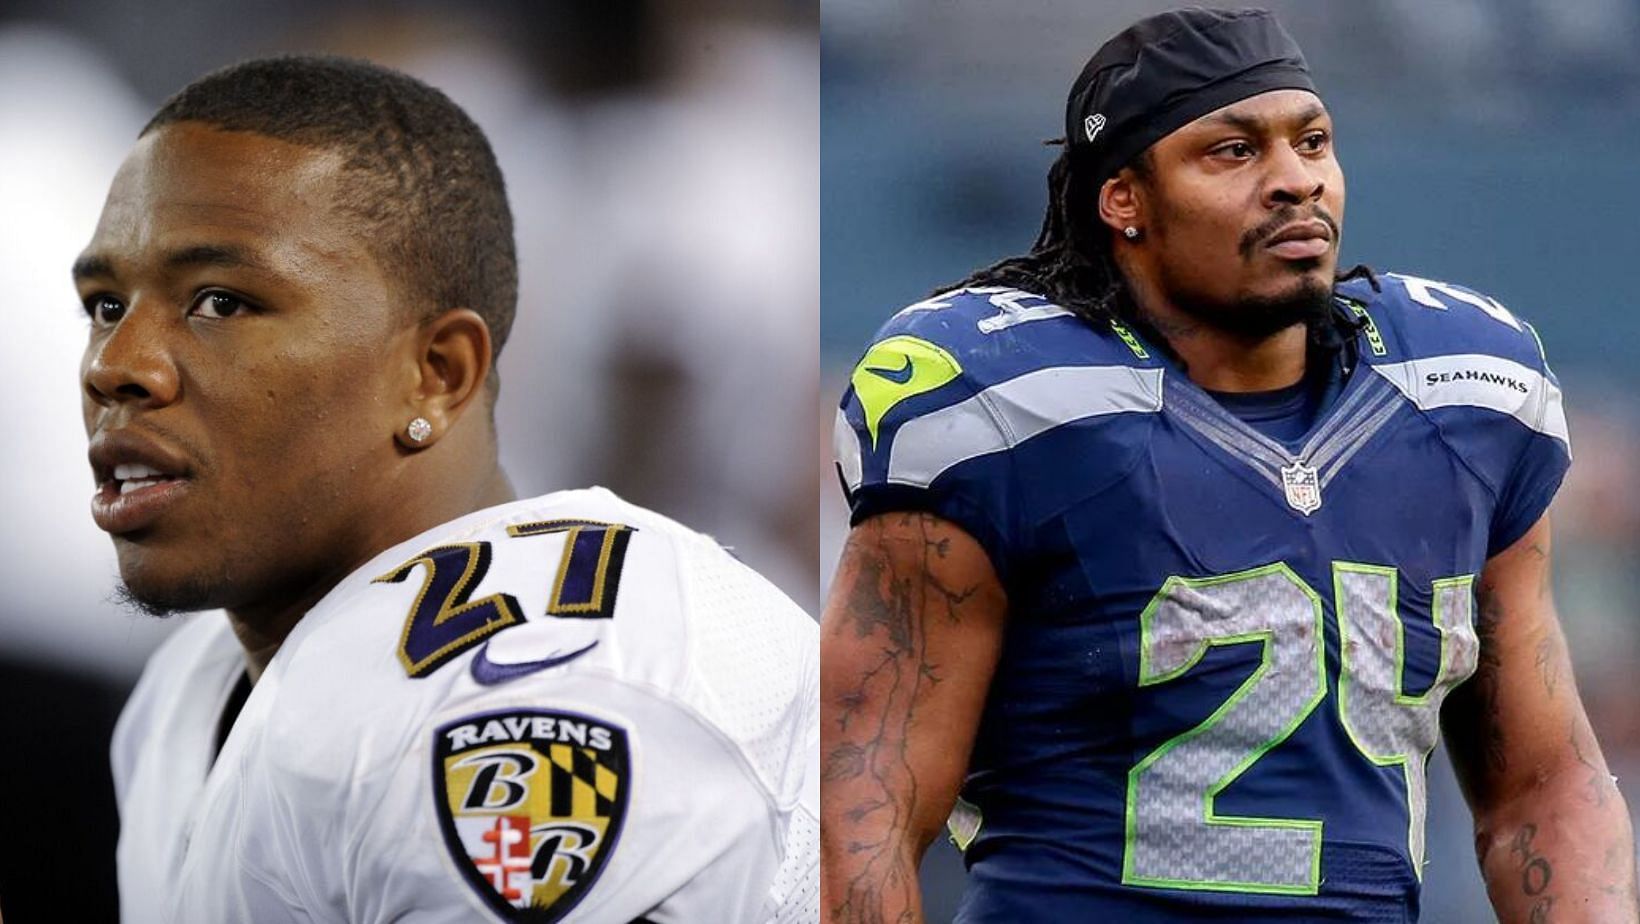 Ray Rice and Marshawn Lynch were present at the Ravens